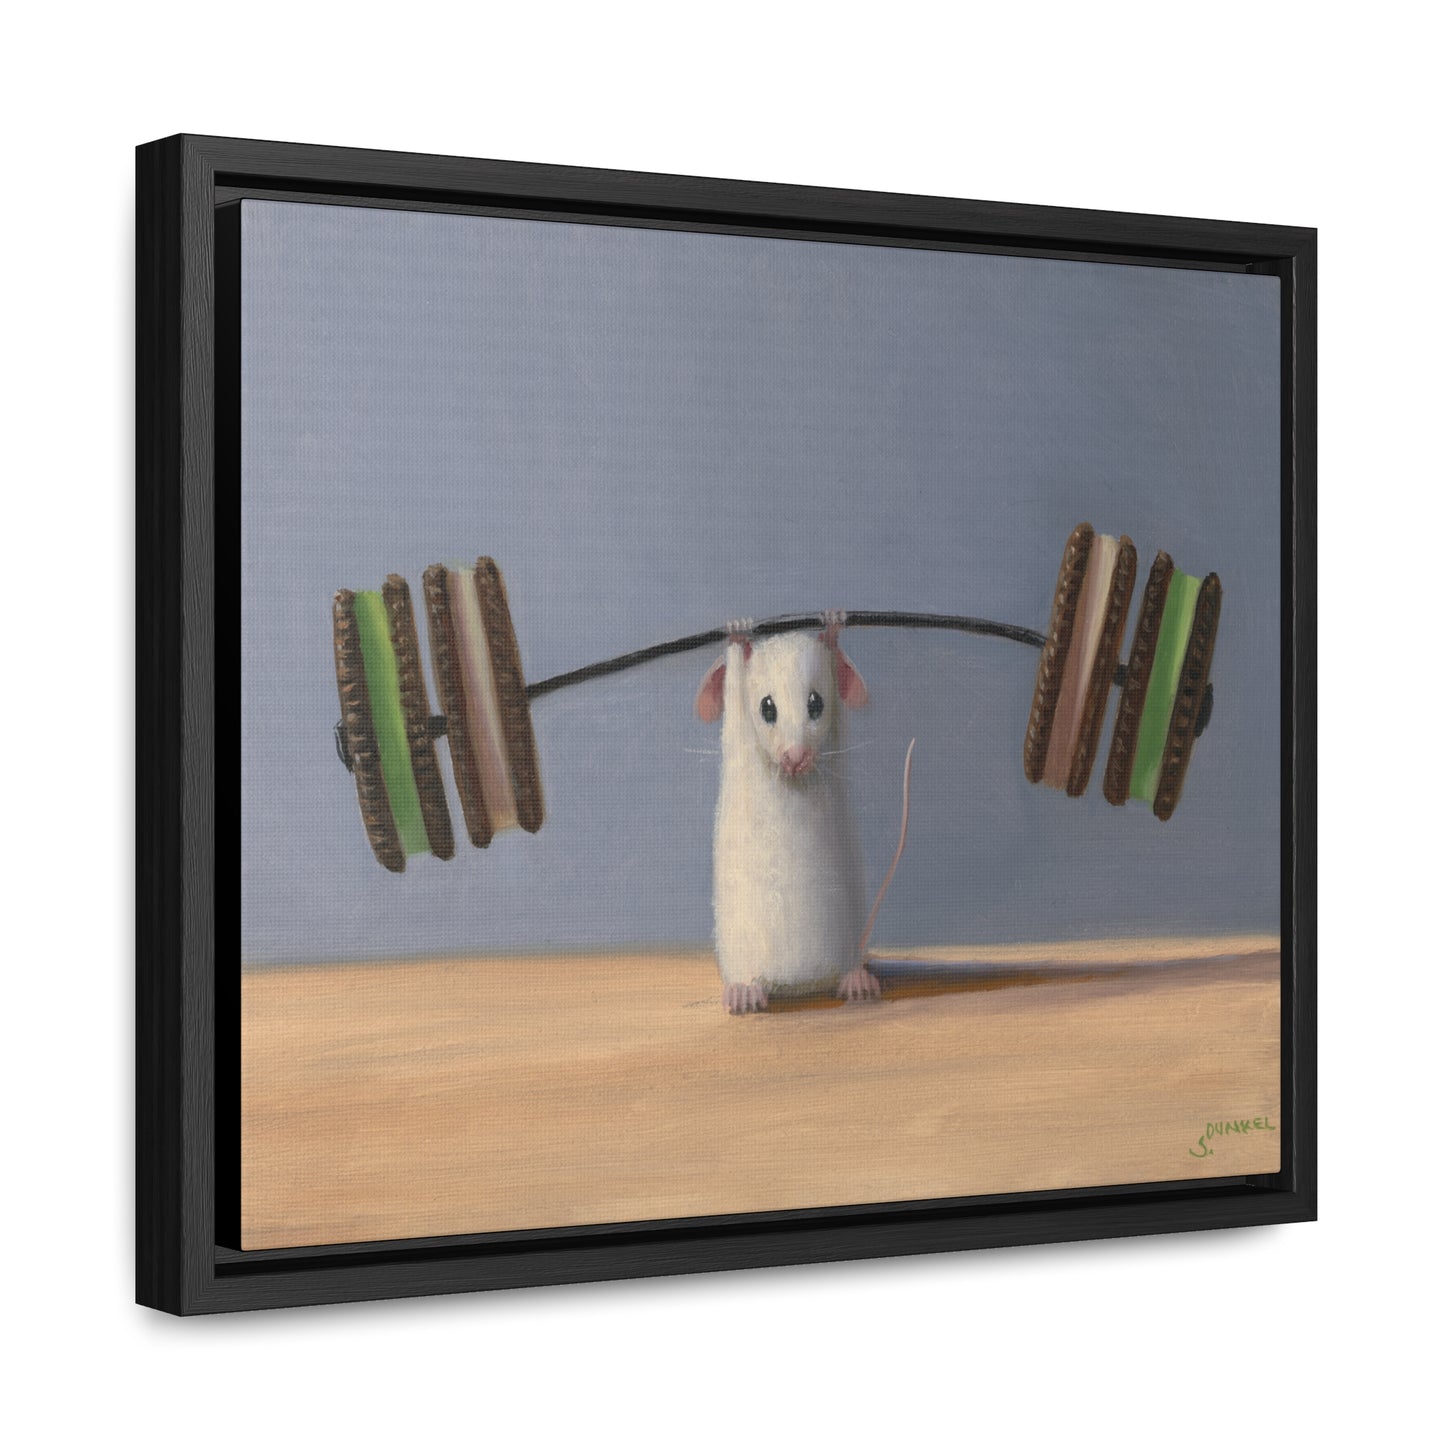 Stuart Dunkel: "Working Out" - Framed Canvas Reproduction